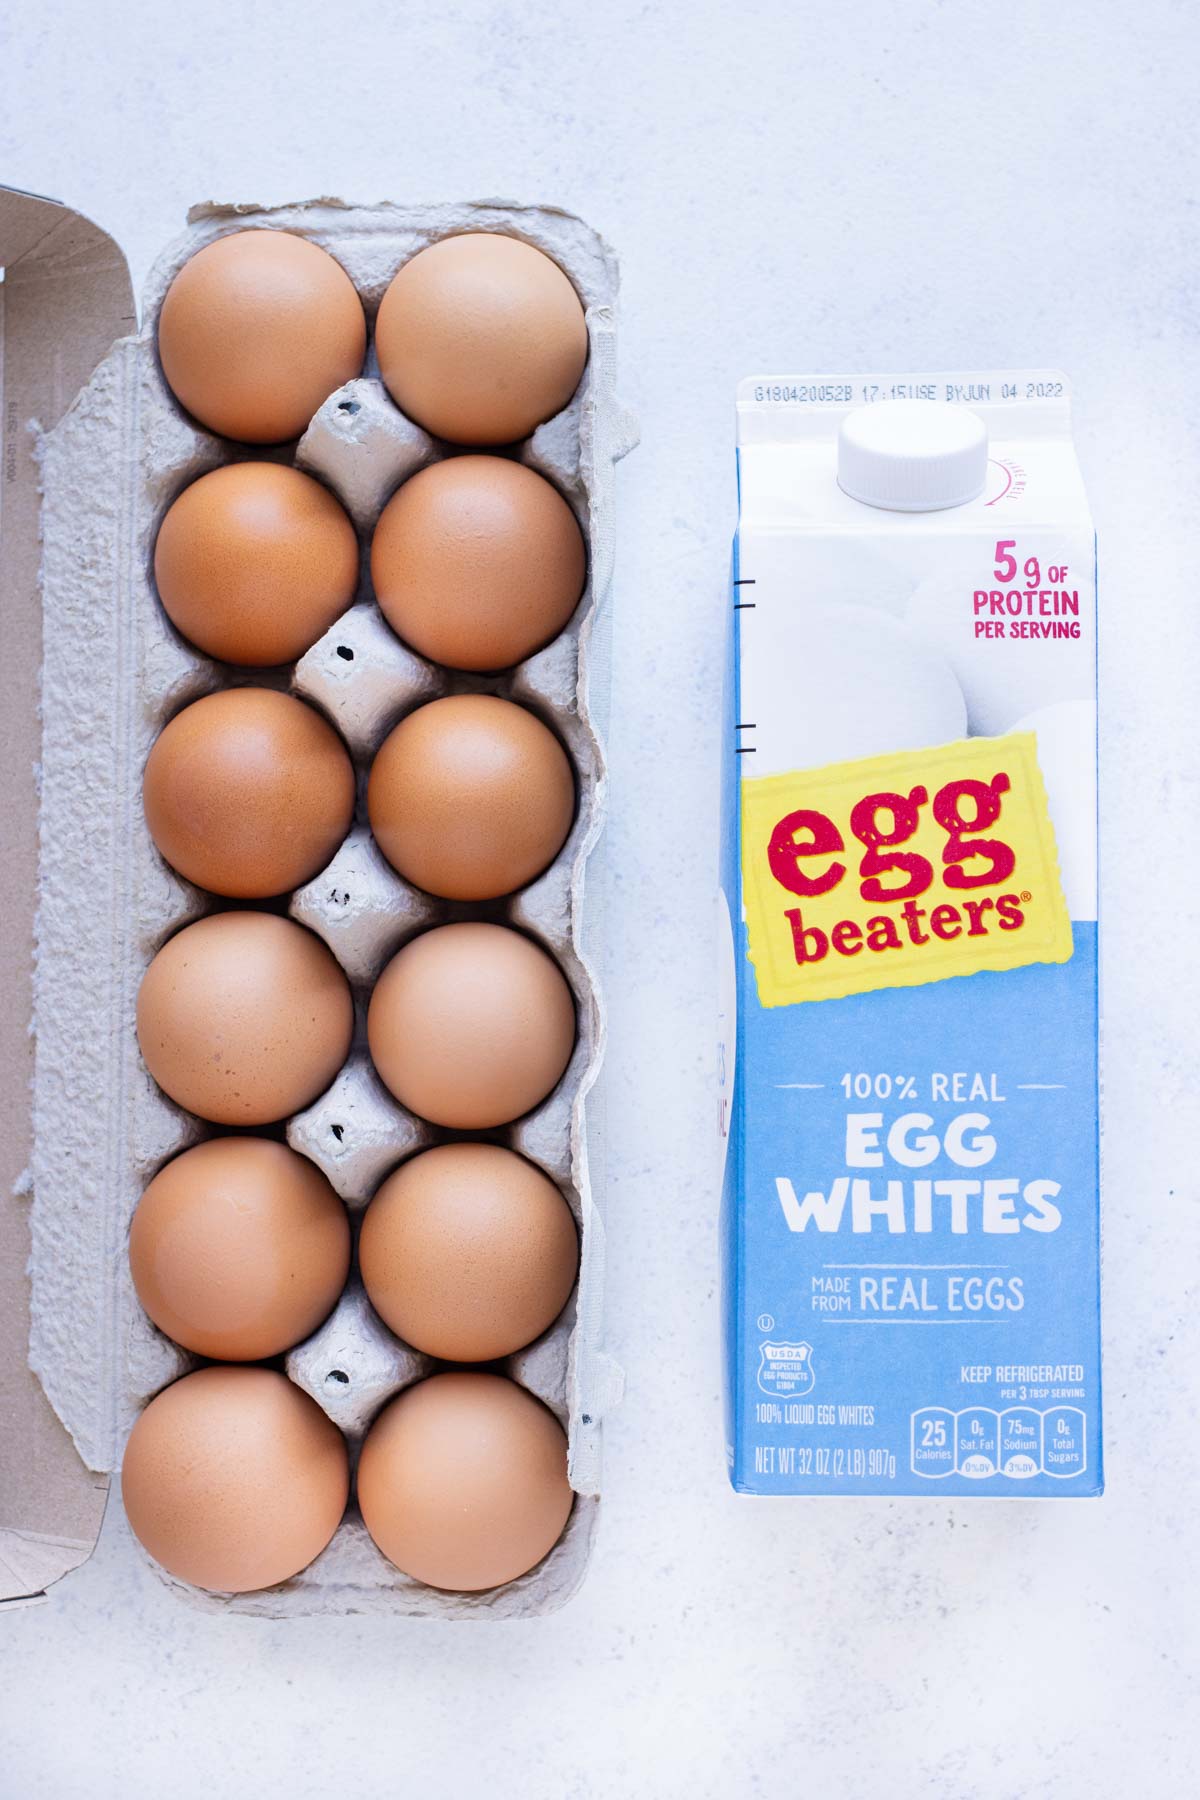 Fresh eggs and a carton of egg whites are shown on the counter.